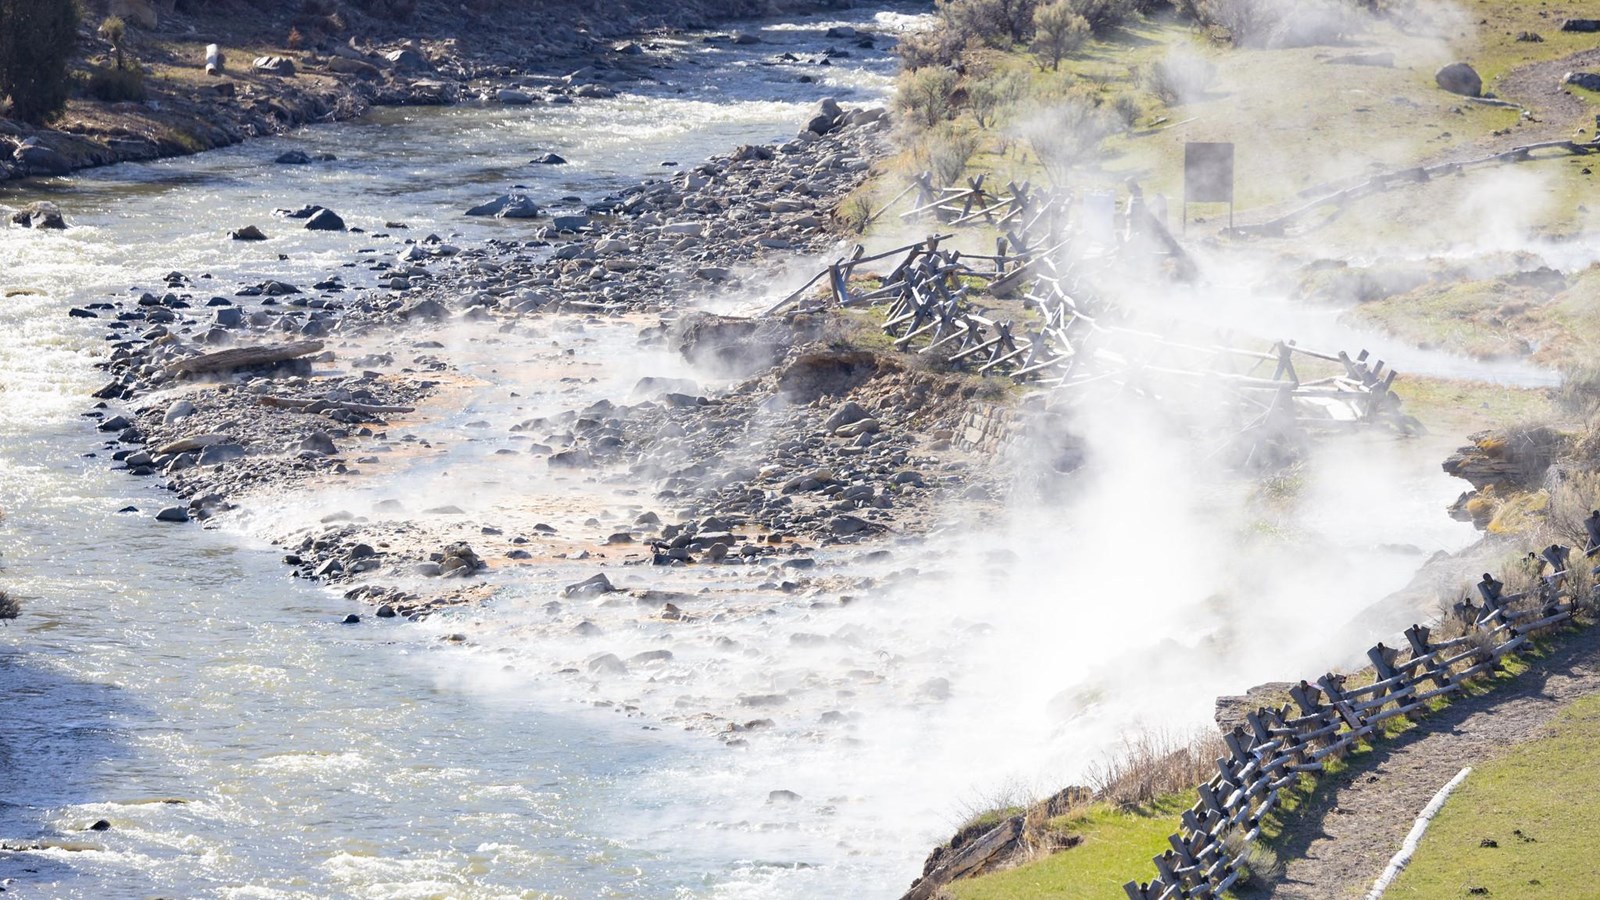 Steam rises from exposed rocks on a bank alongside a river.